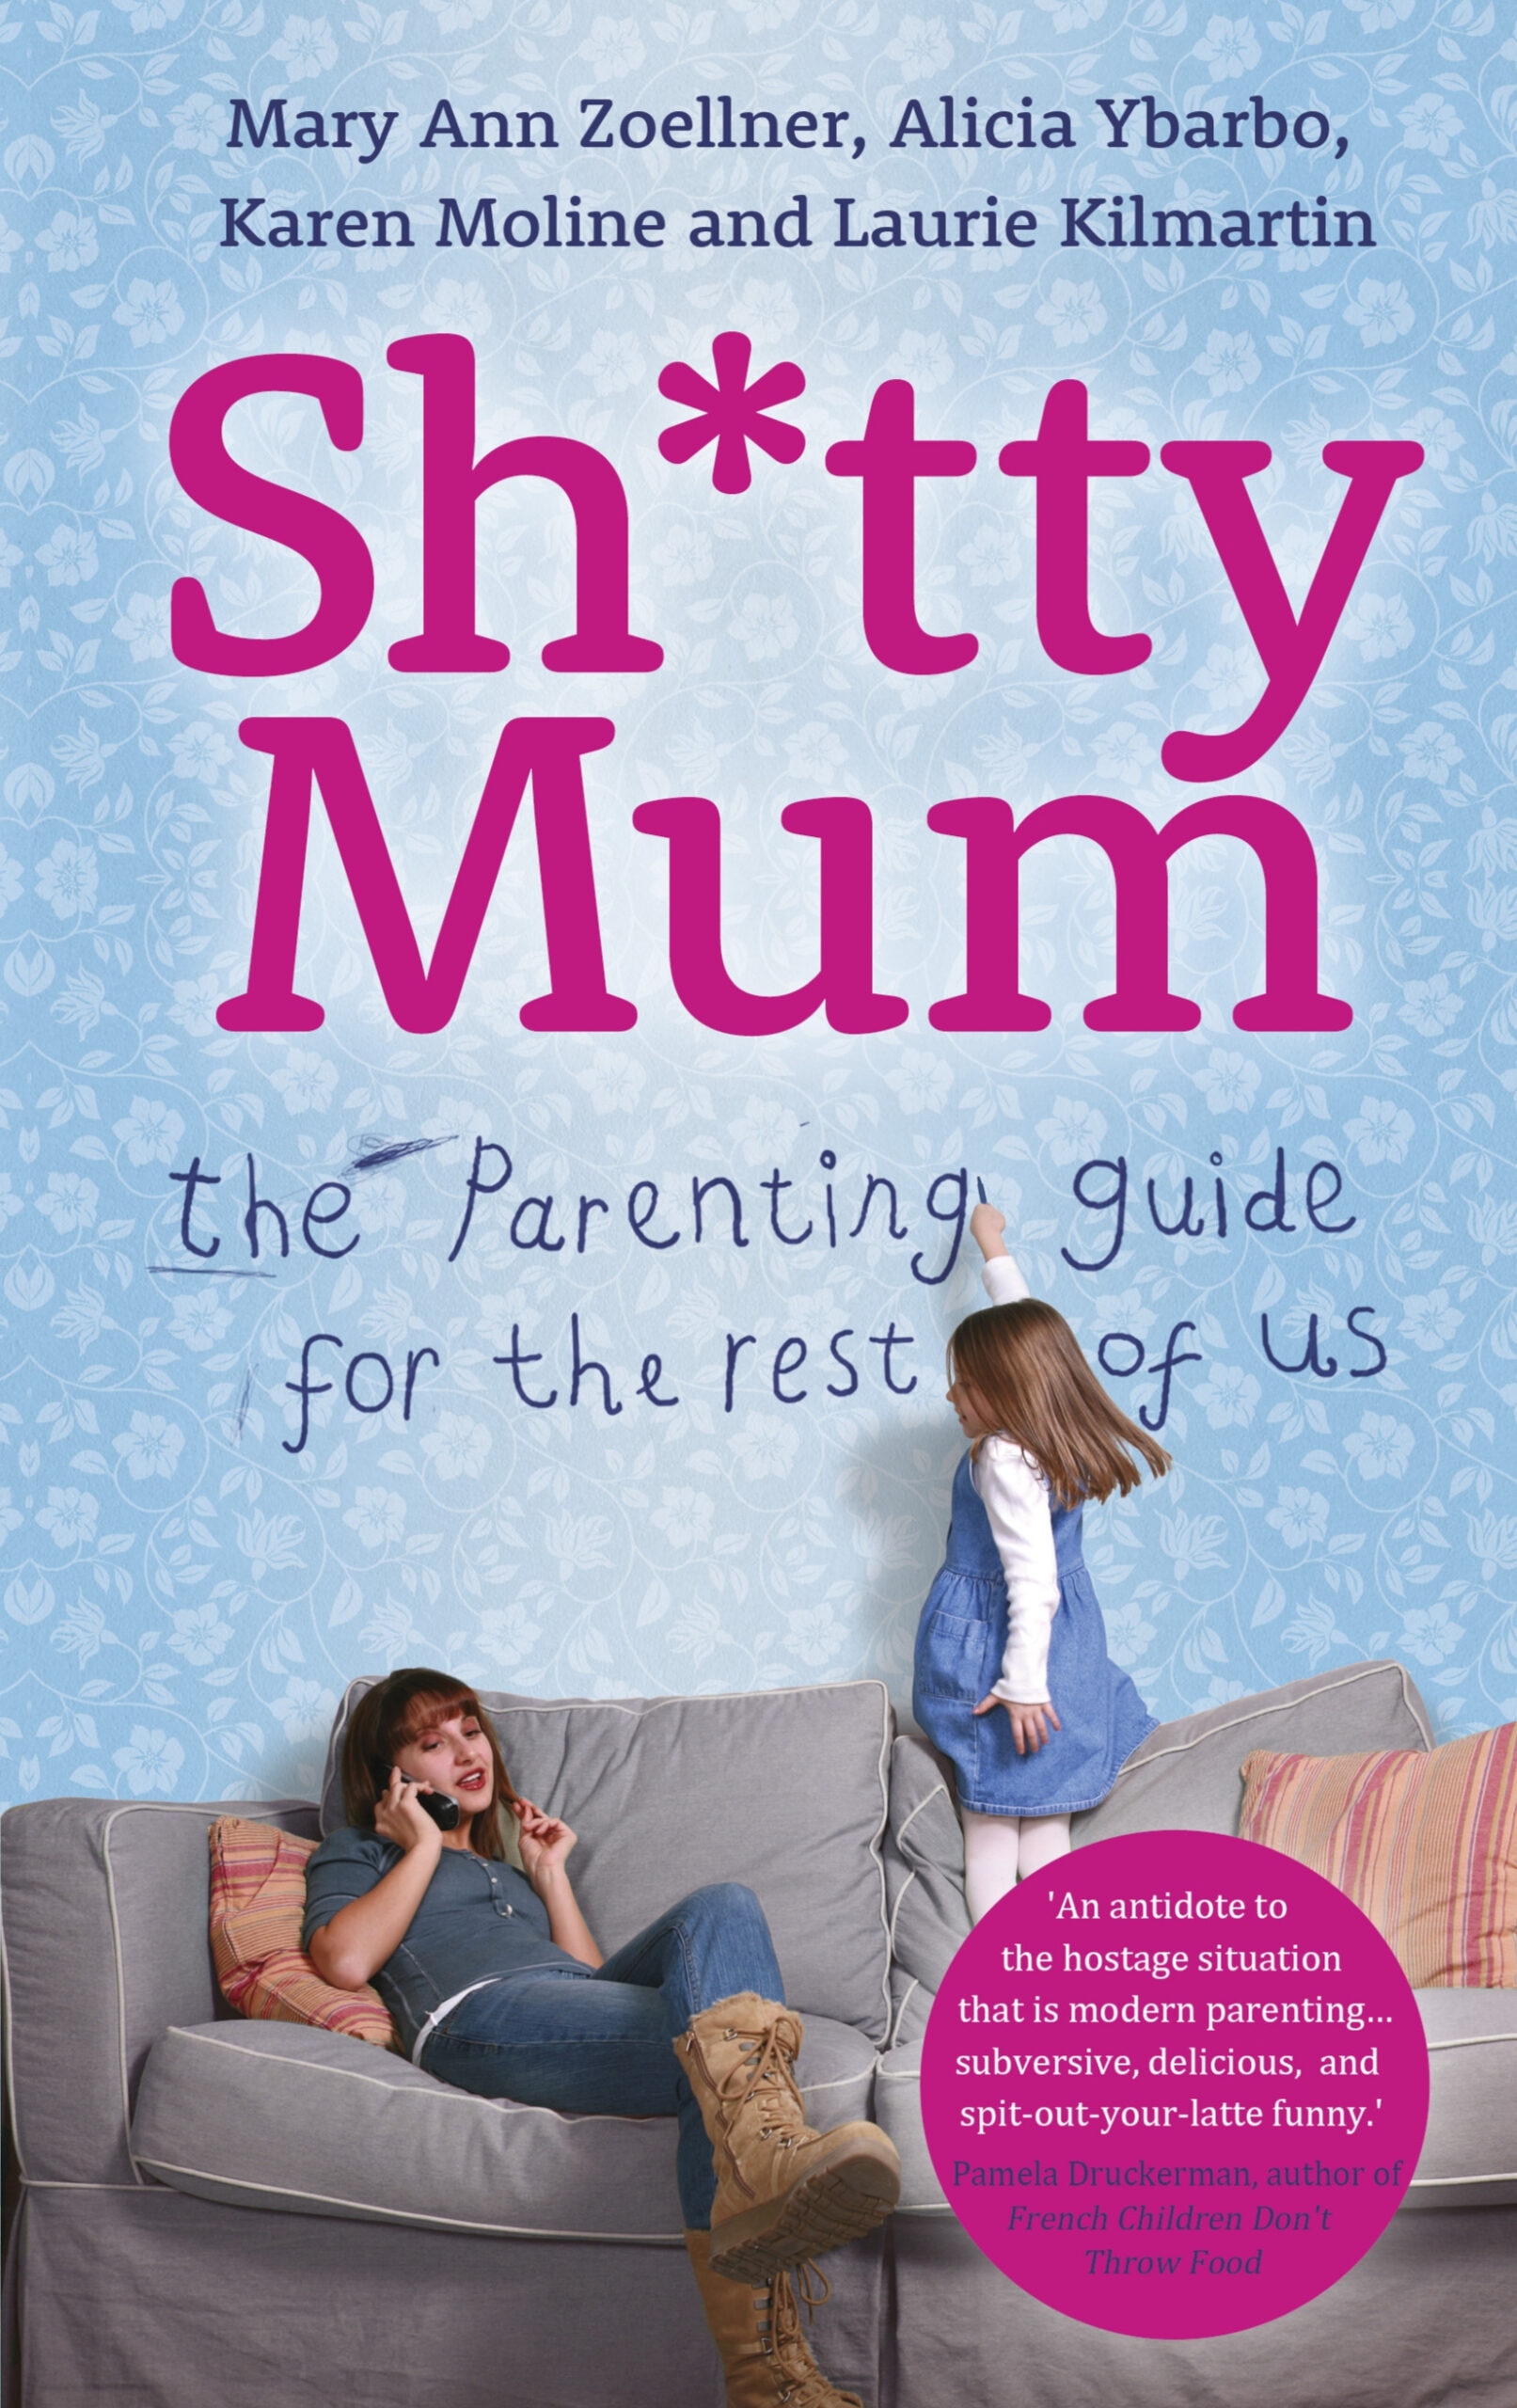 Sh*tty Mum: The Parenting Guide for the Rest of Us - Mary Ann Zoellner & Alicia Ybarbo